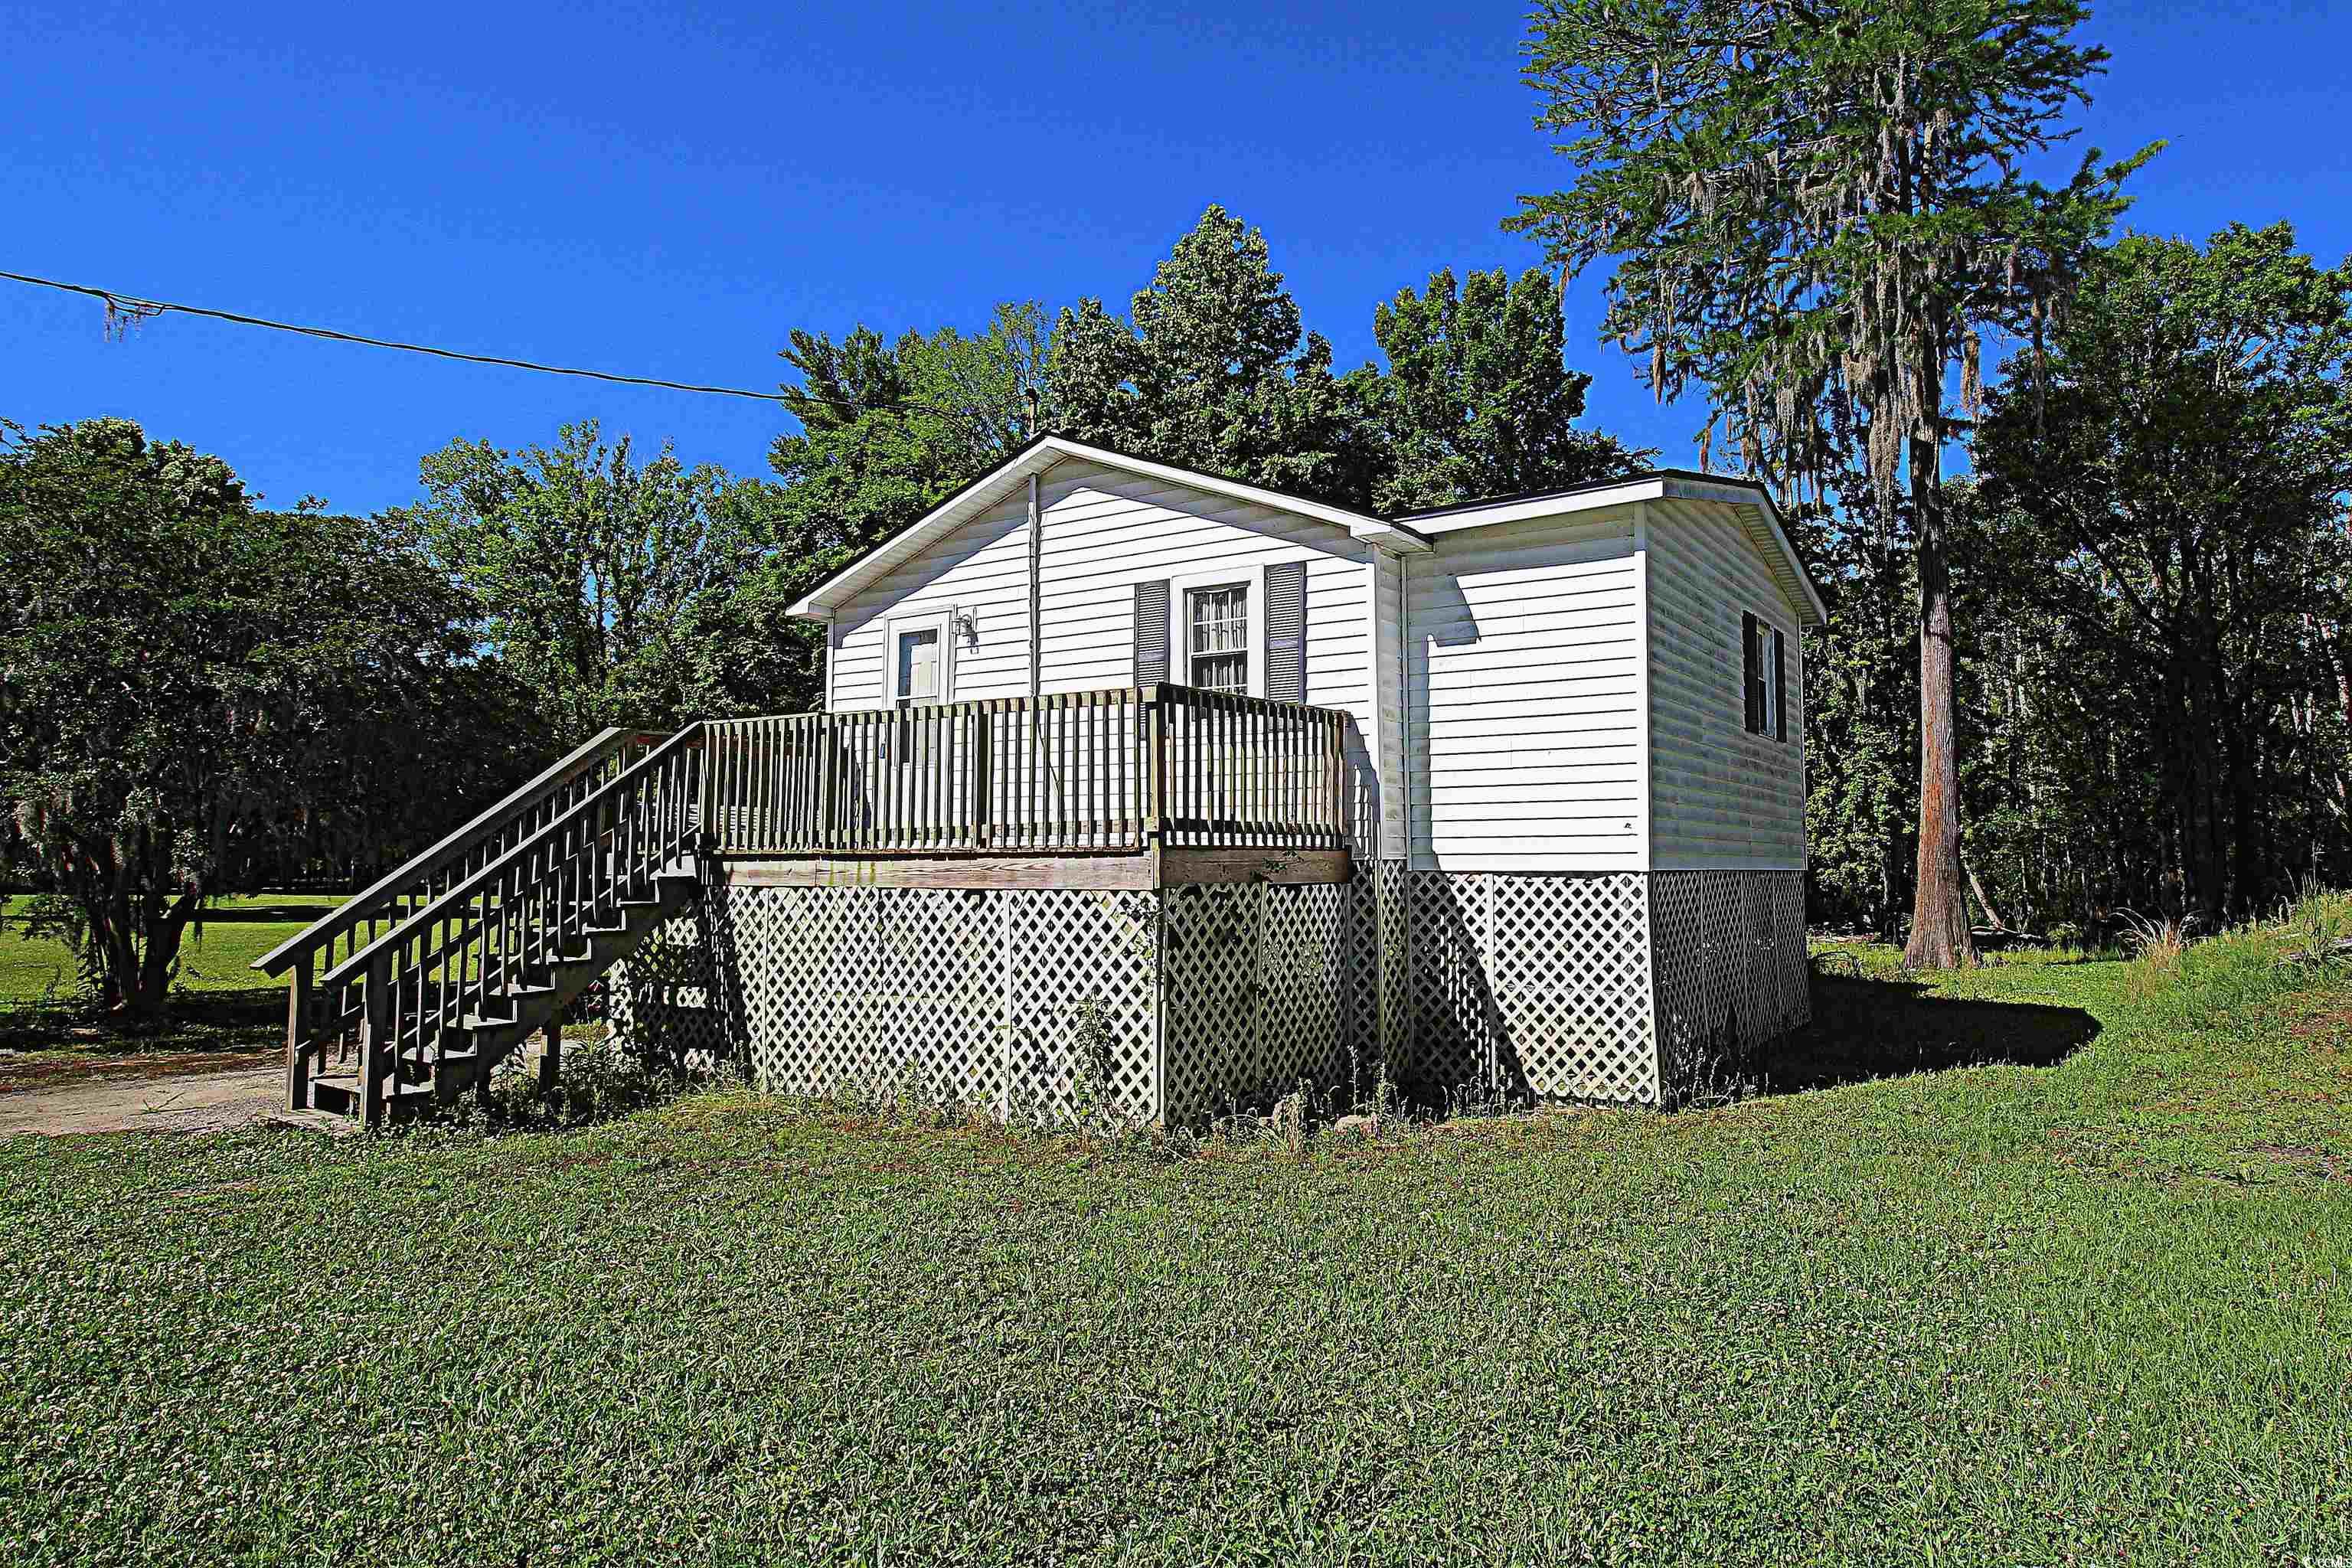 escape for weekends or weeks on end. no hoa featuring river living with room for all your rv's, boats, jet skis and motorcycles.  large deck with waccamaw river views. only 500 feet from the public boat launch. house completely remodeled in 2019. must see!!